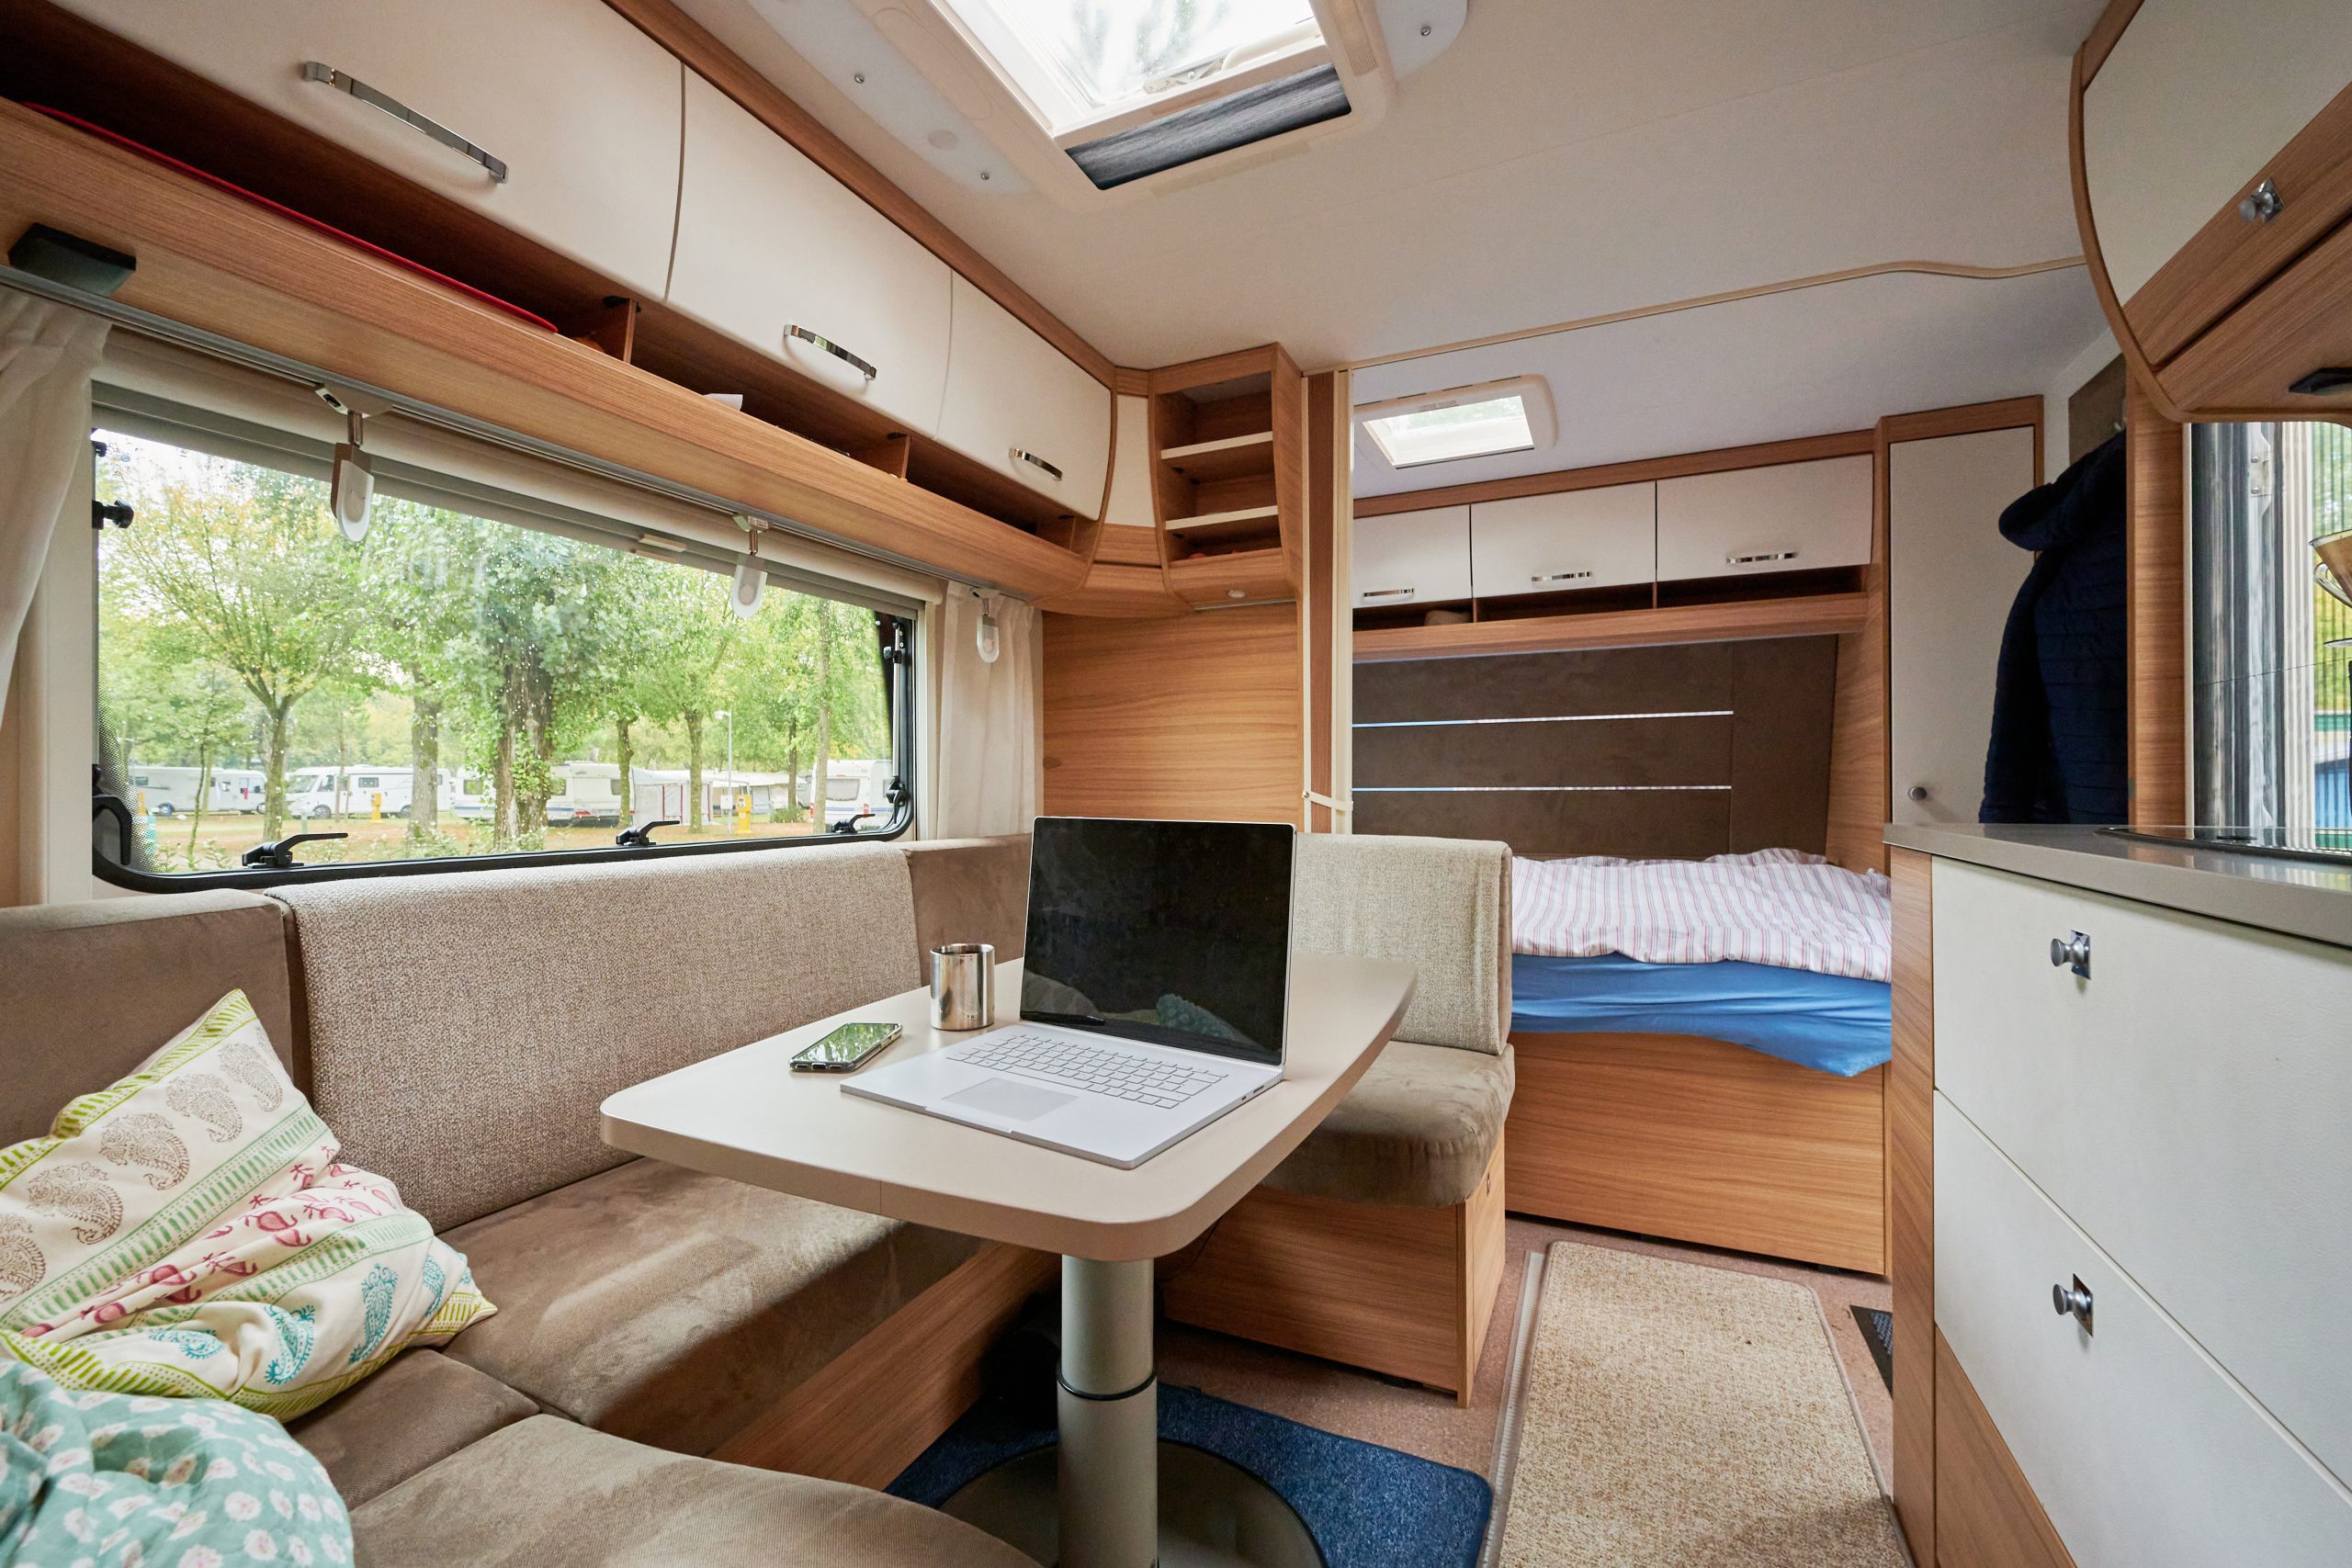 How to Maximize Space in Your RV